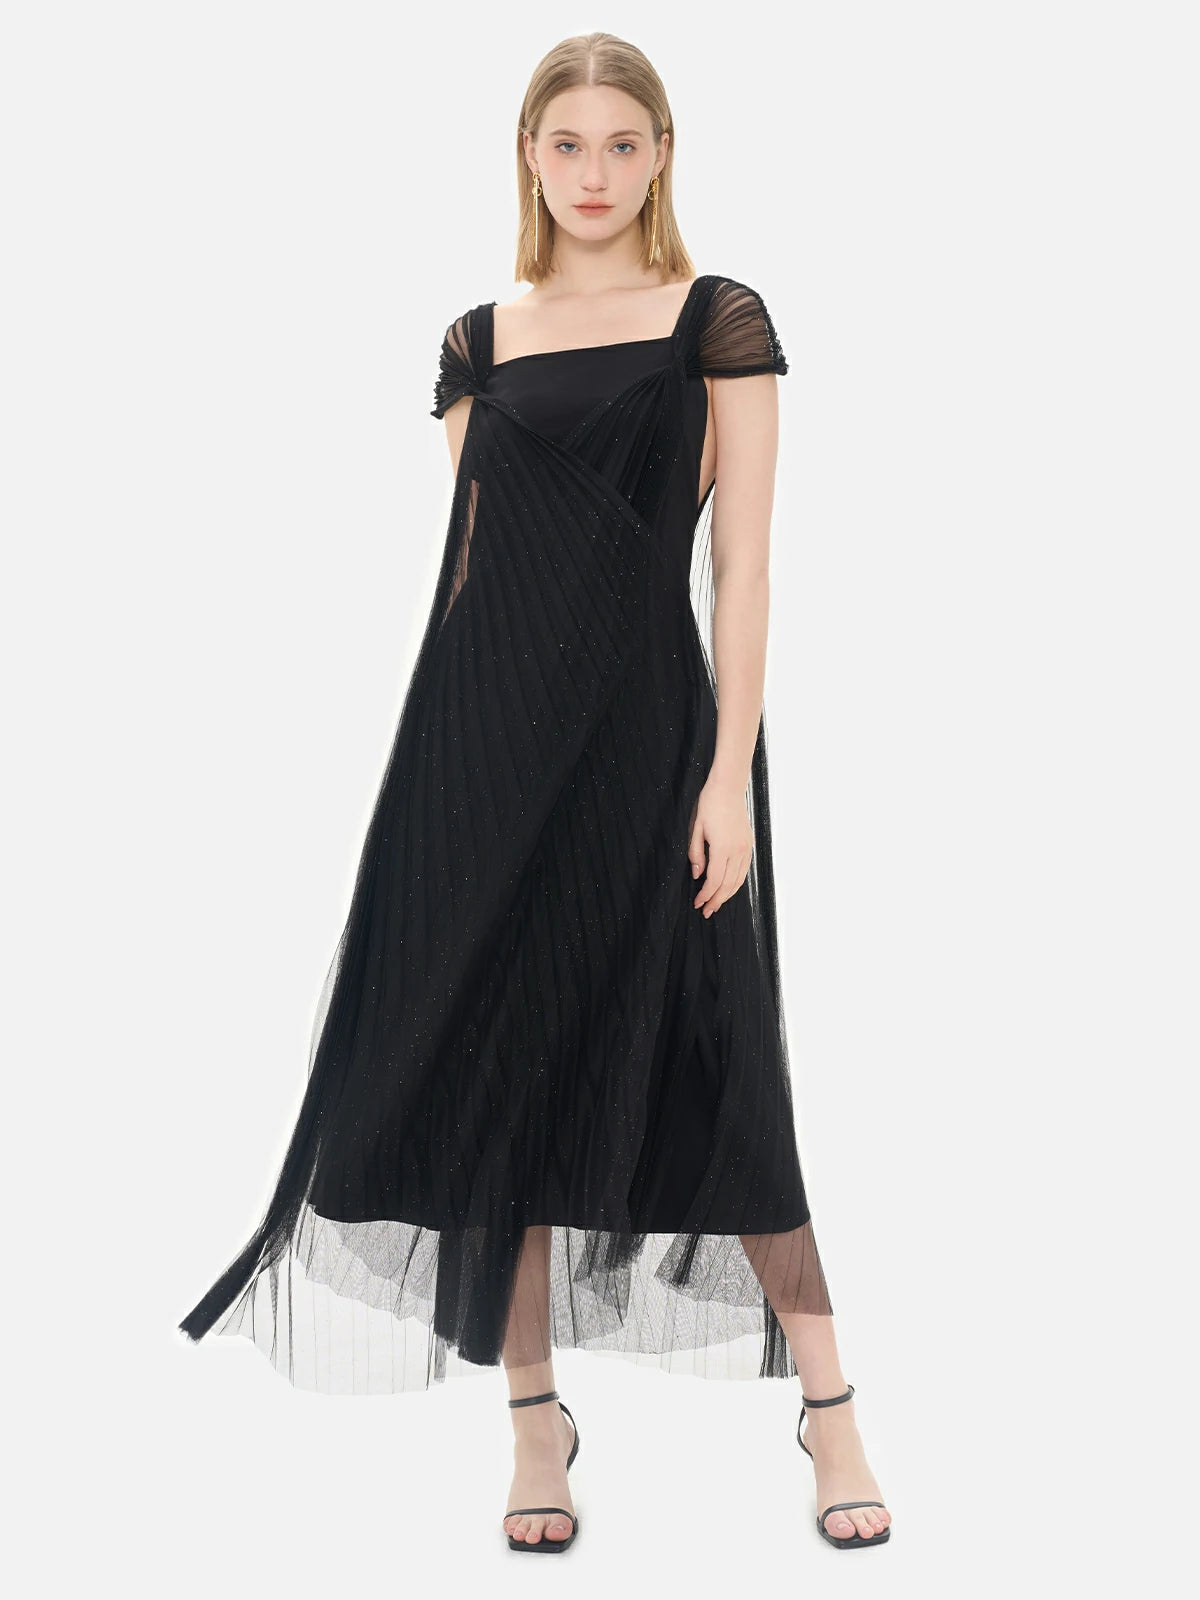 Elegant black dress with crisscross pleated mesh, cap sleeves, and sparkling sequins, perfect for a glamorous evening event.